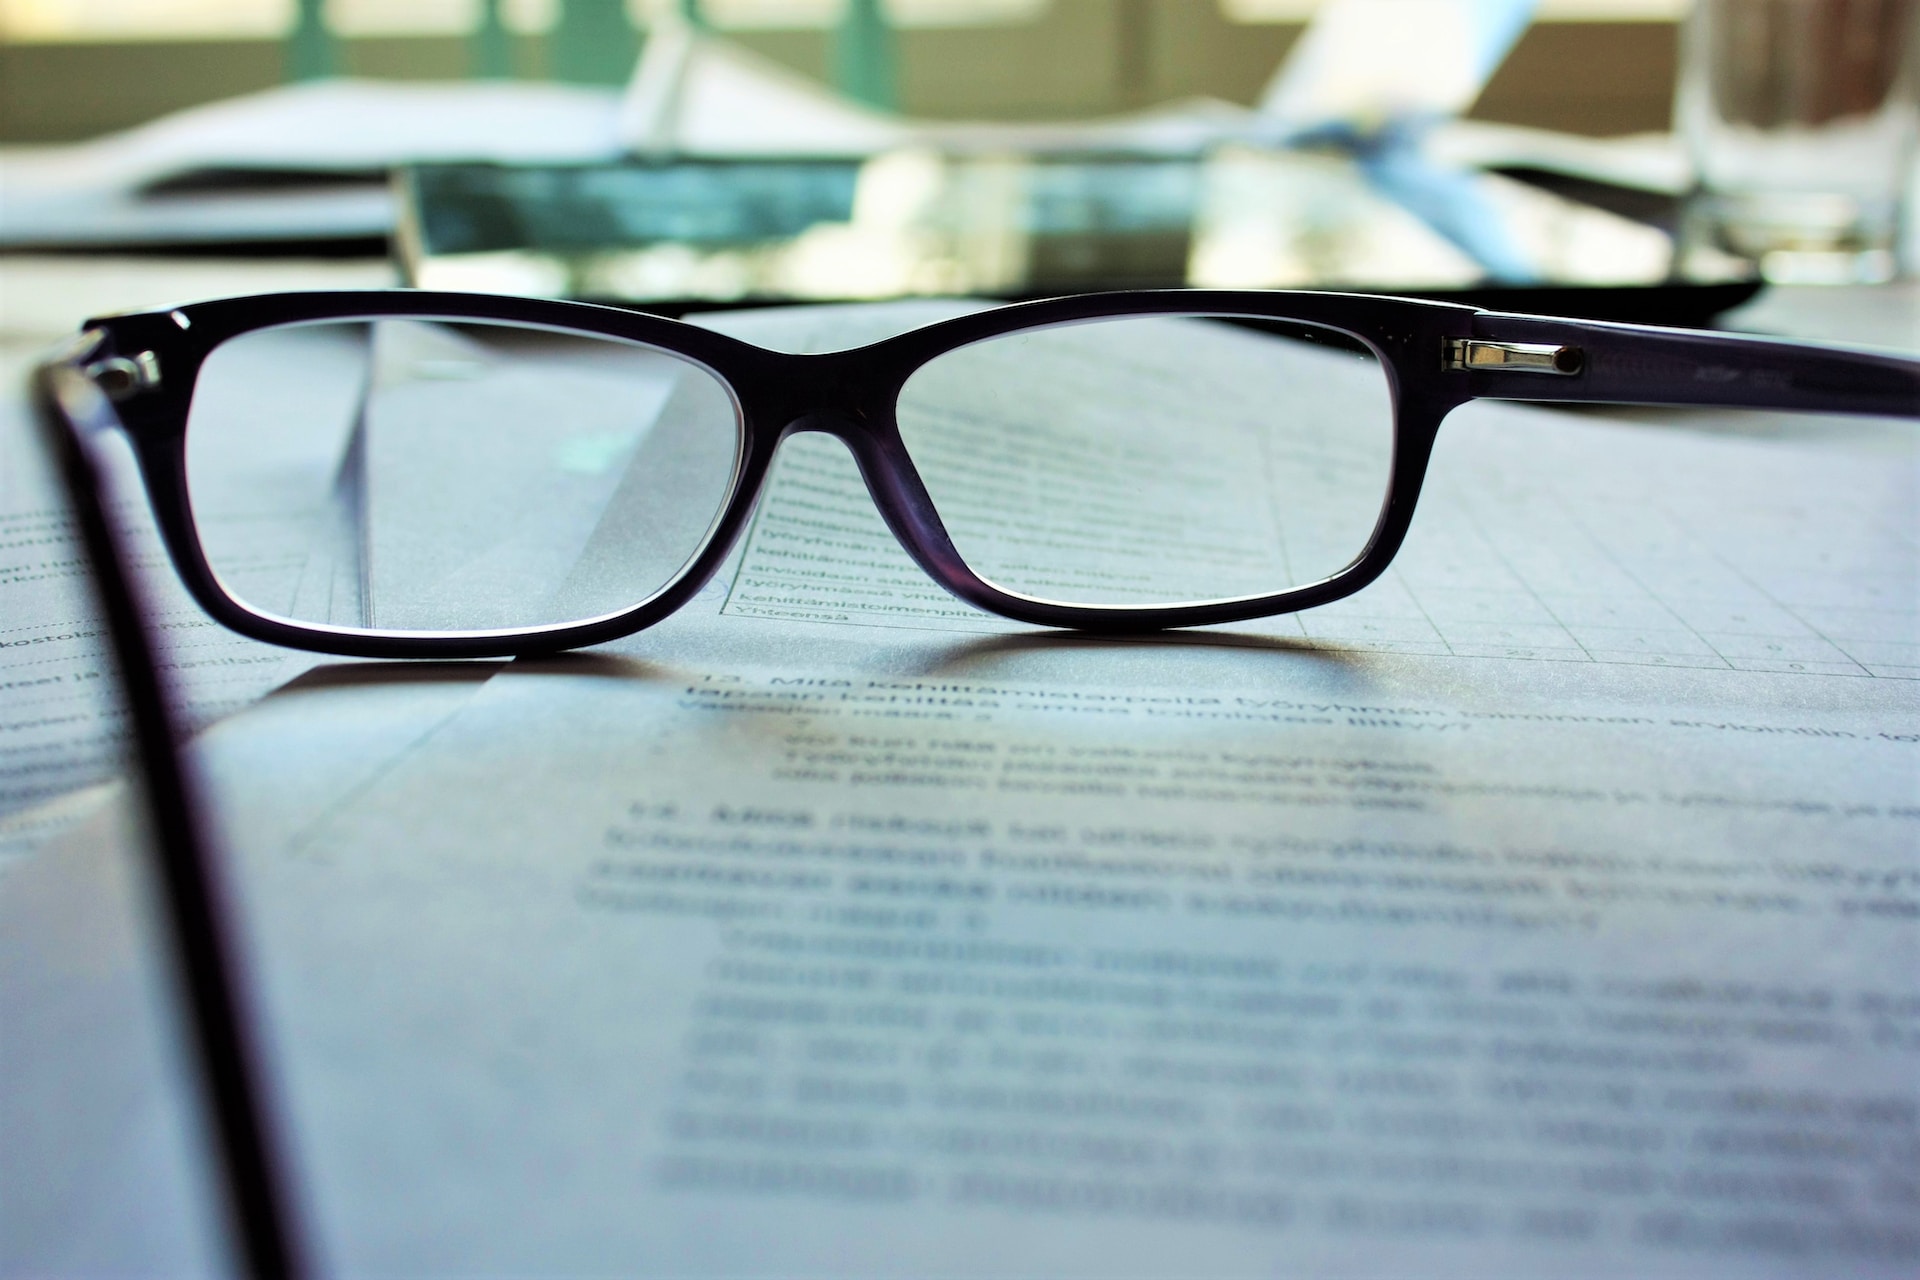 View of glasses on a contract.